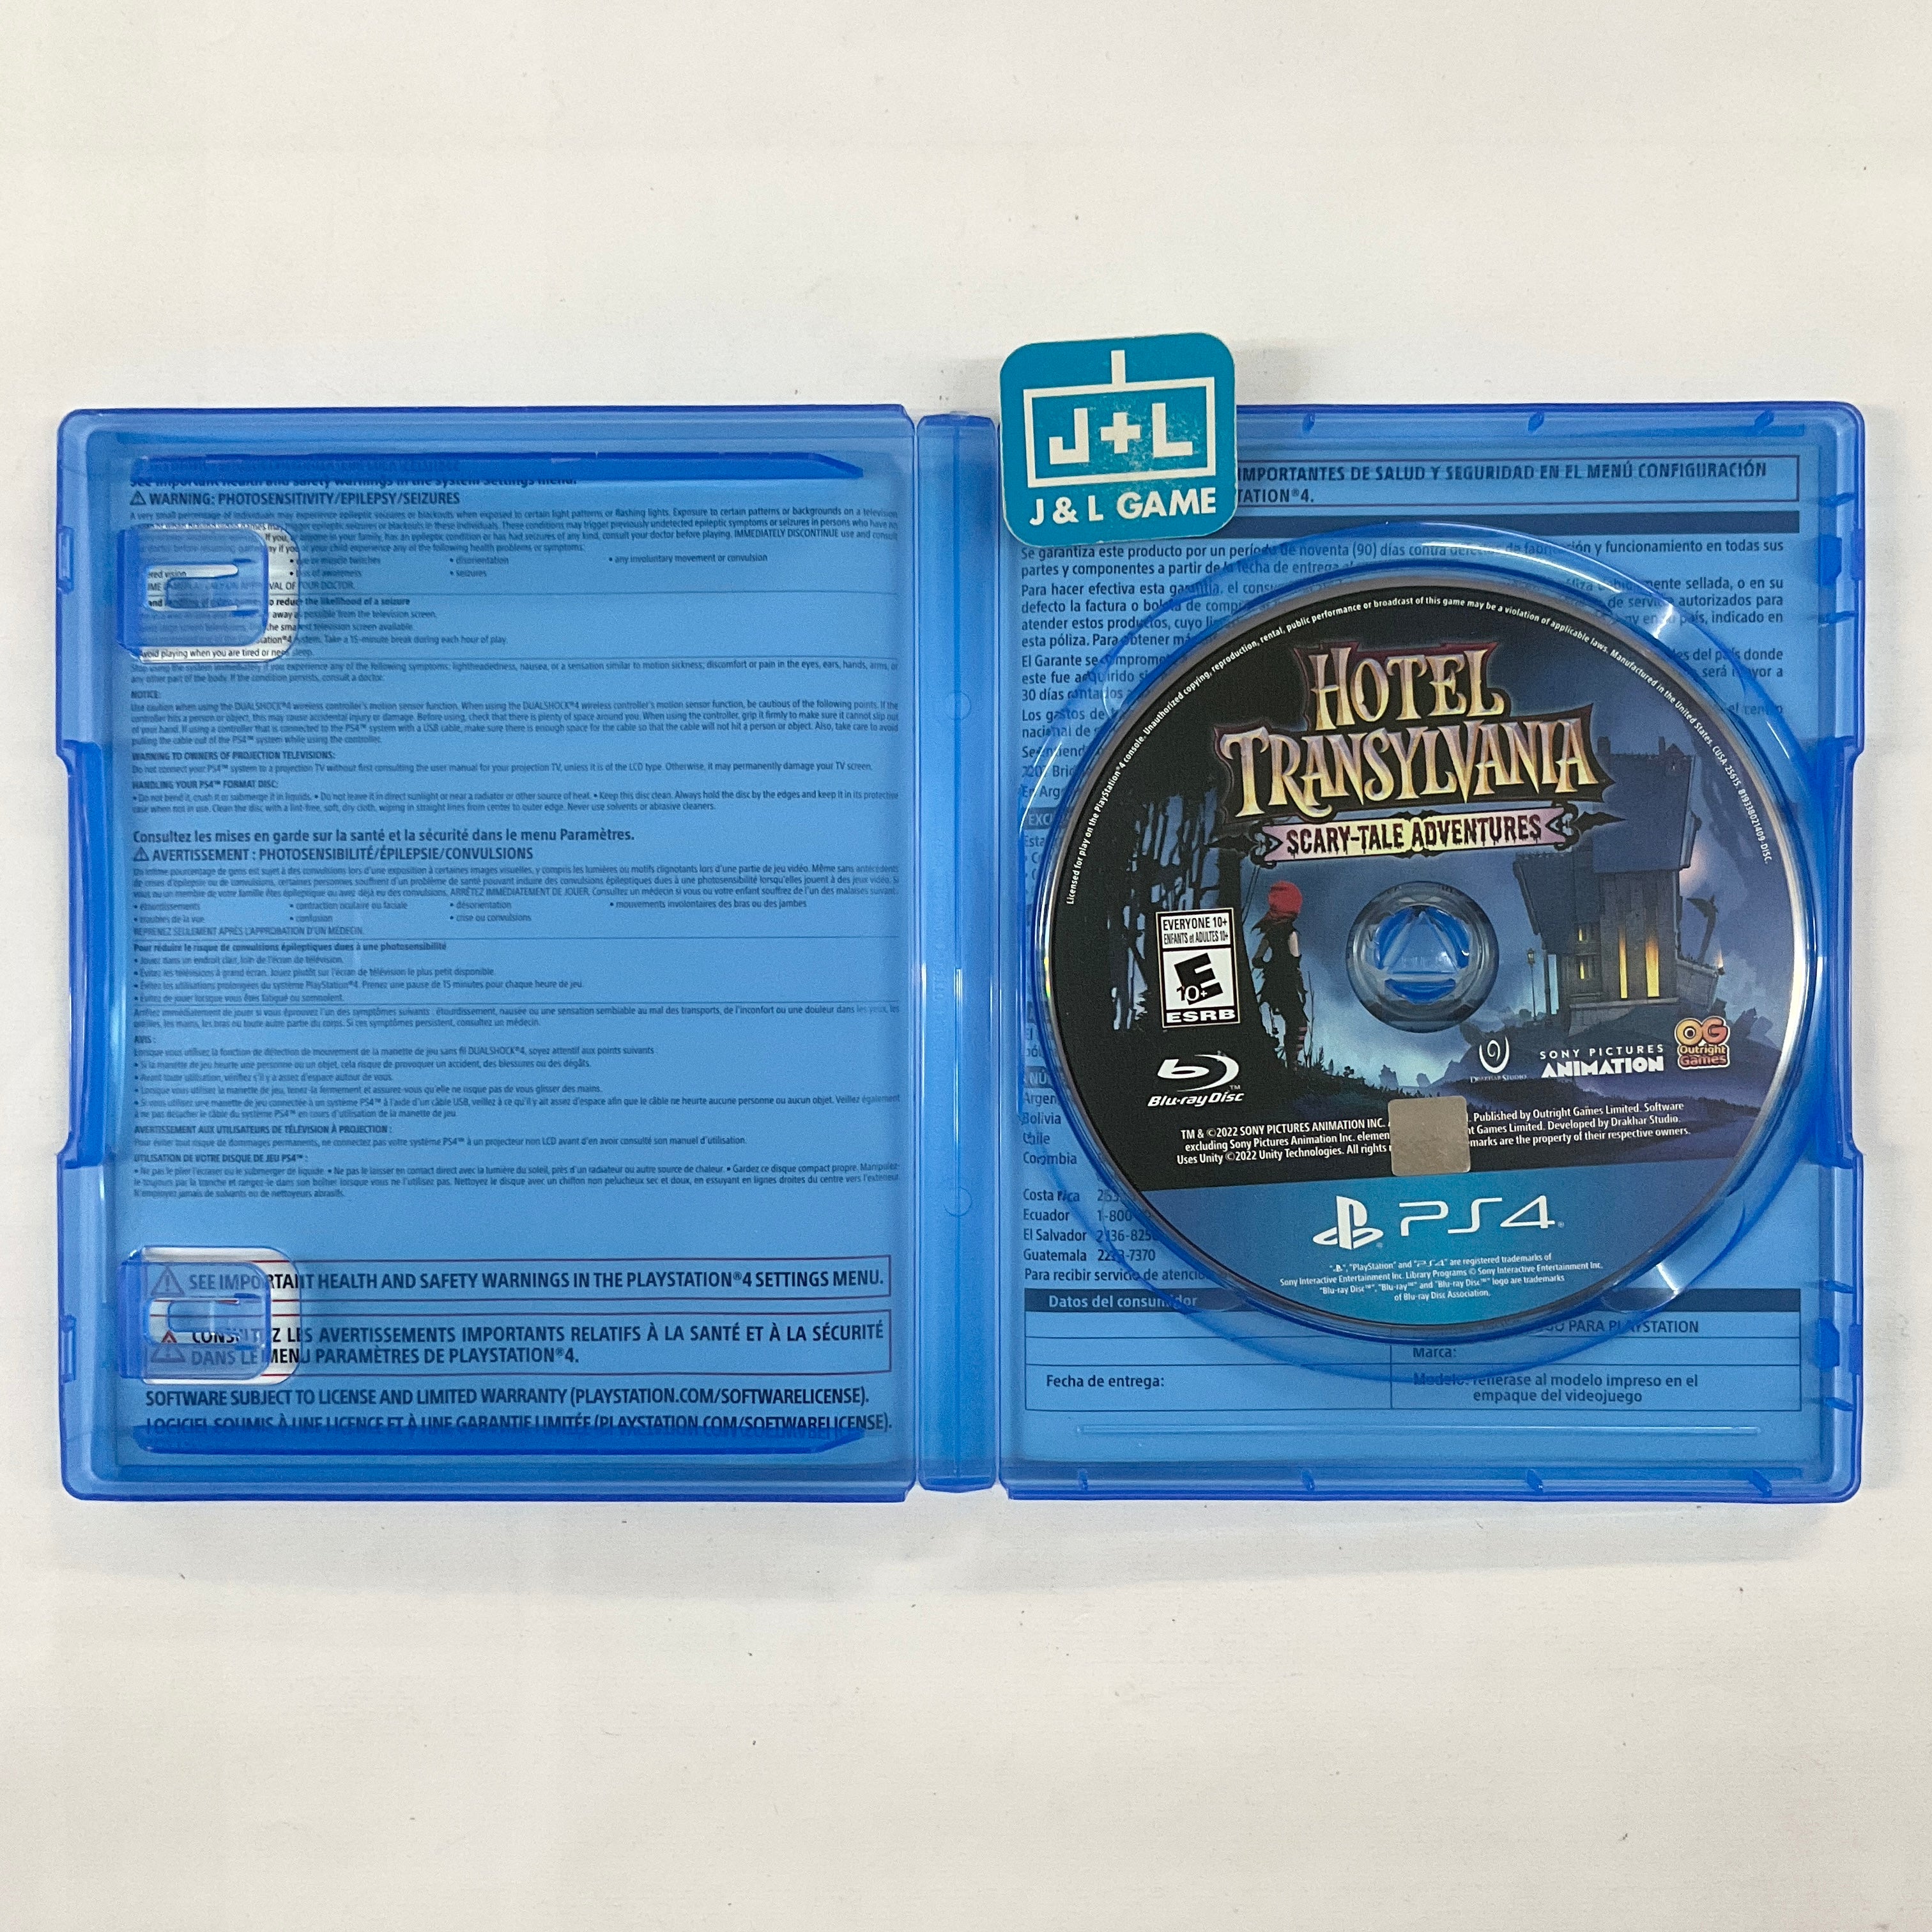 Hotel Transylvania: Scary-Tale Adventures - (PS4) PlayStation 4 [Pre-Owned] Video Games Outright Games   